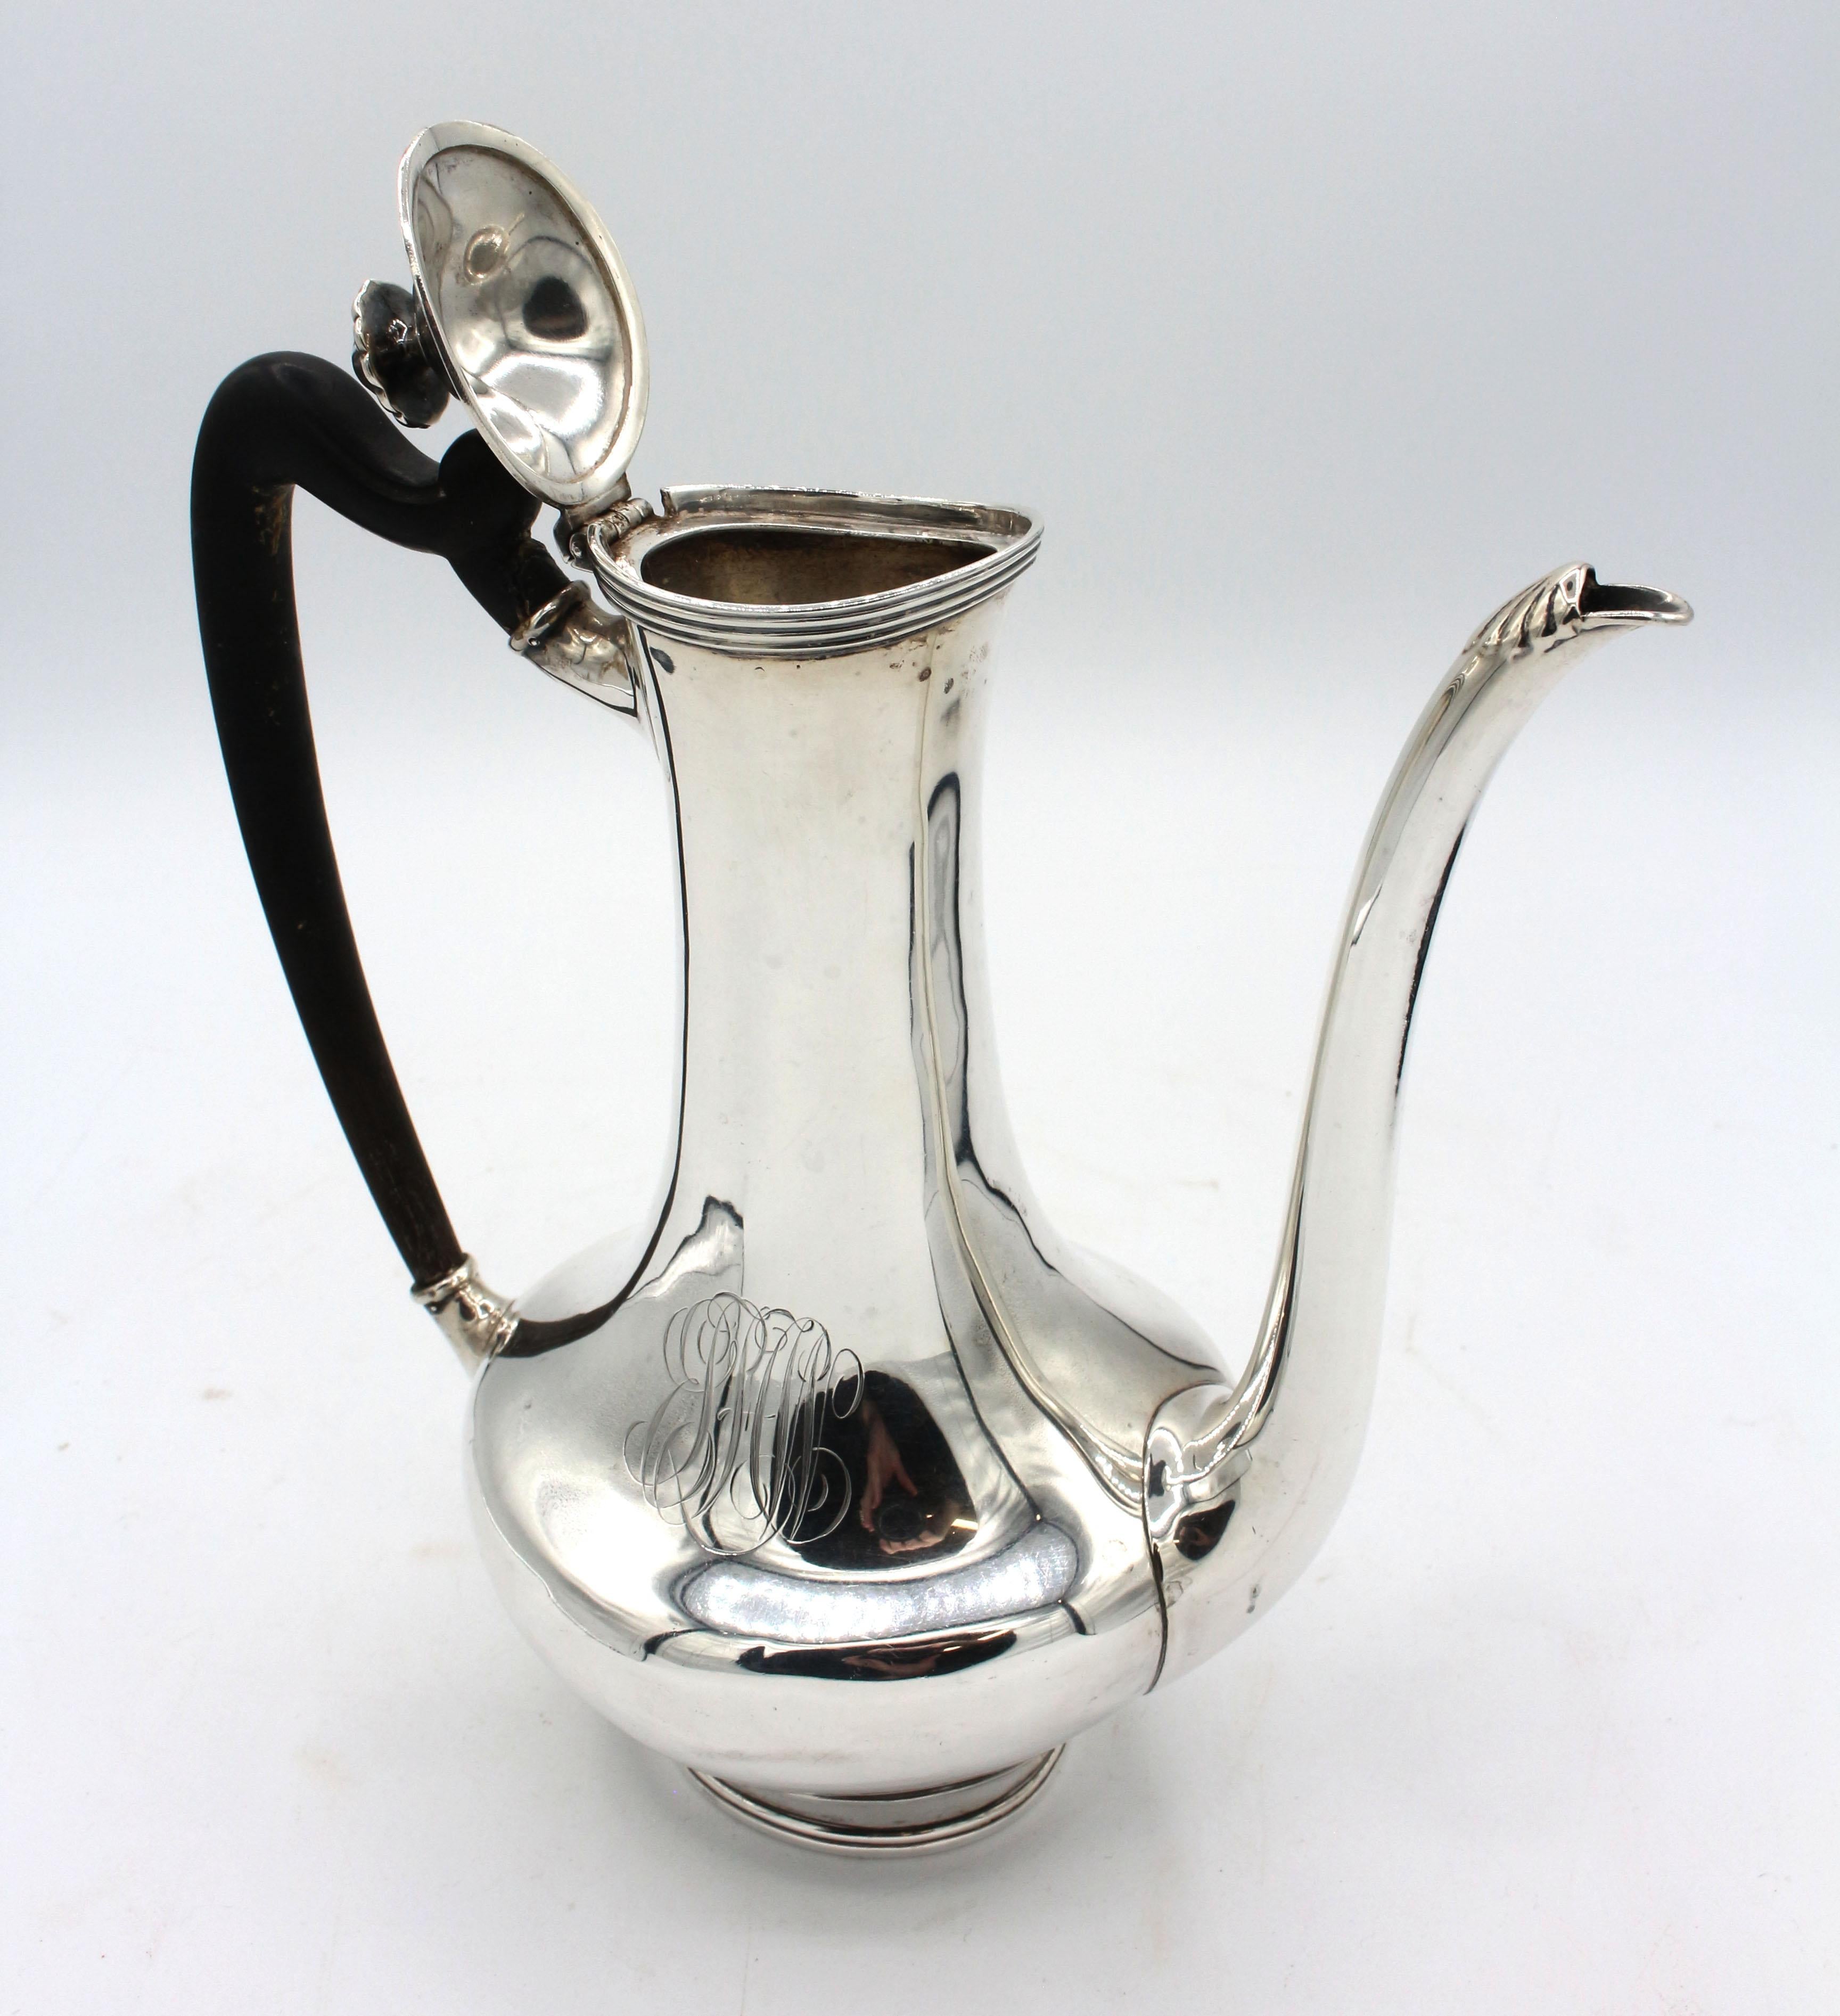 Sterling silver demitasse pot by Towle, early 20th century. Georgian taste. Retailed by Shreve, Crump & Lowe. Repaired ebony handle. Monogram. A few dimples. 12.20 troy oz.
7.75